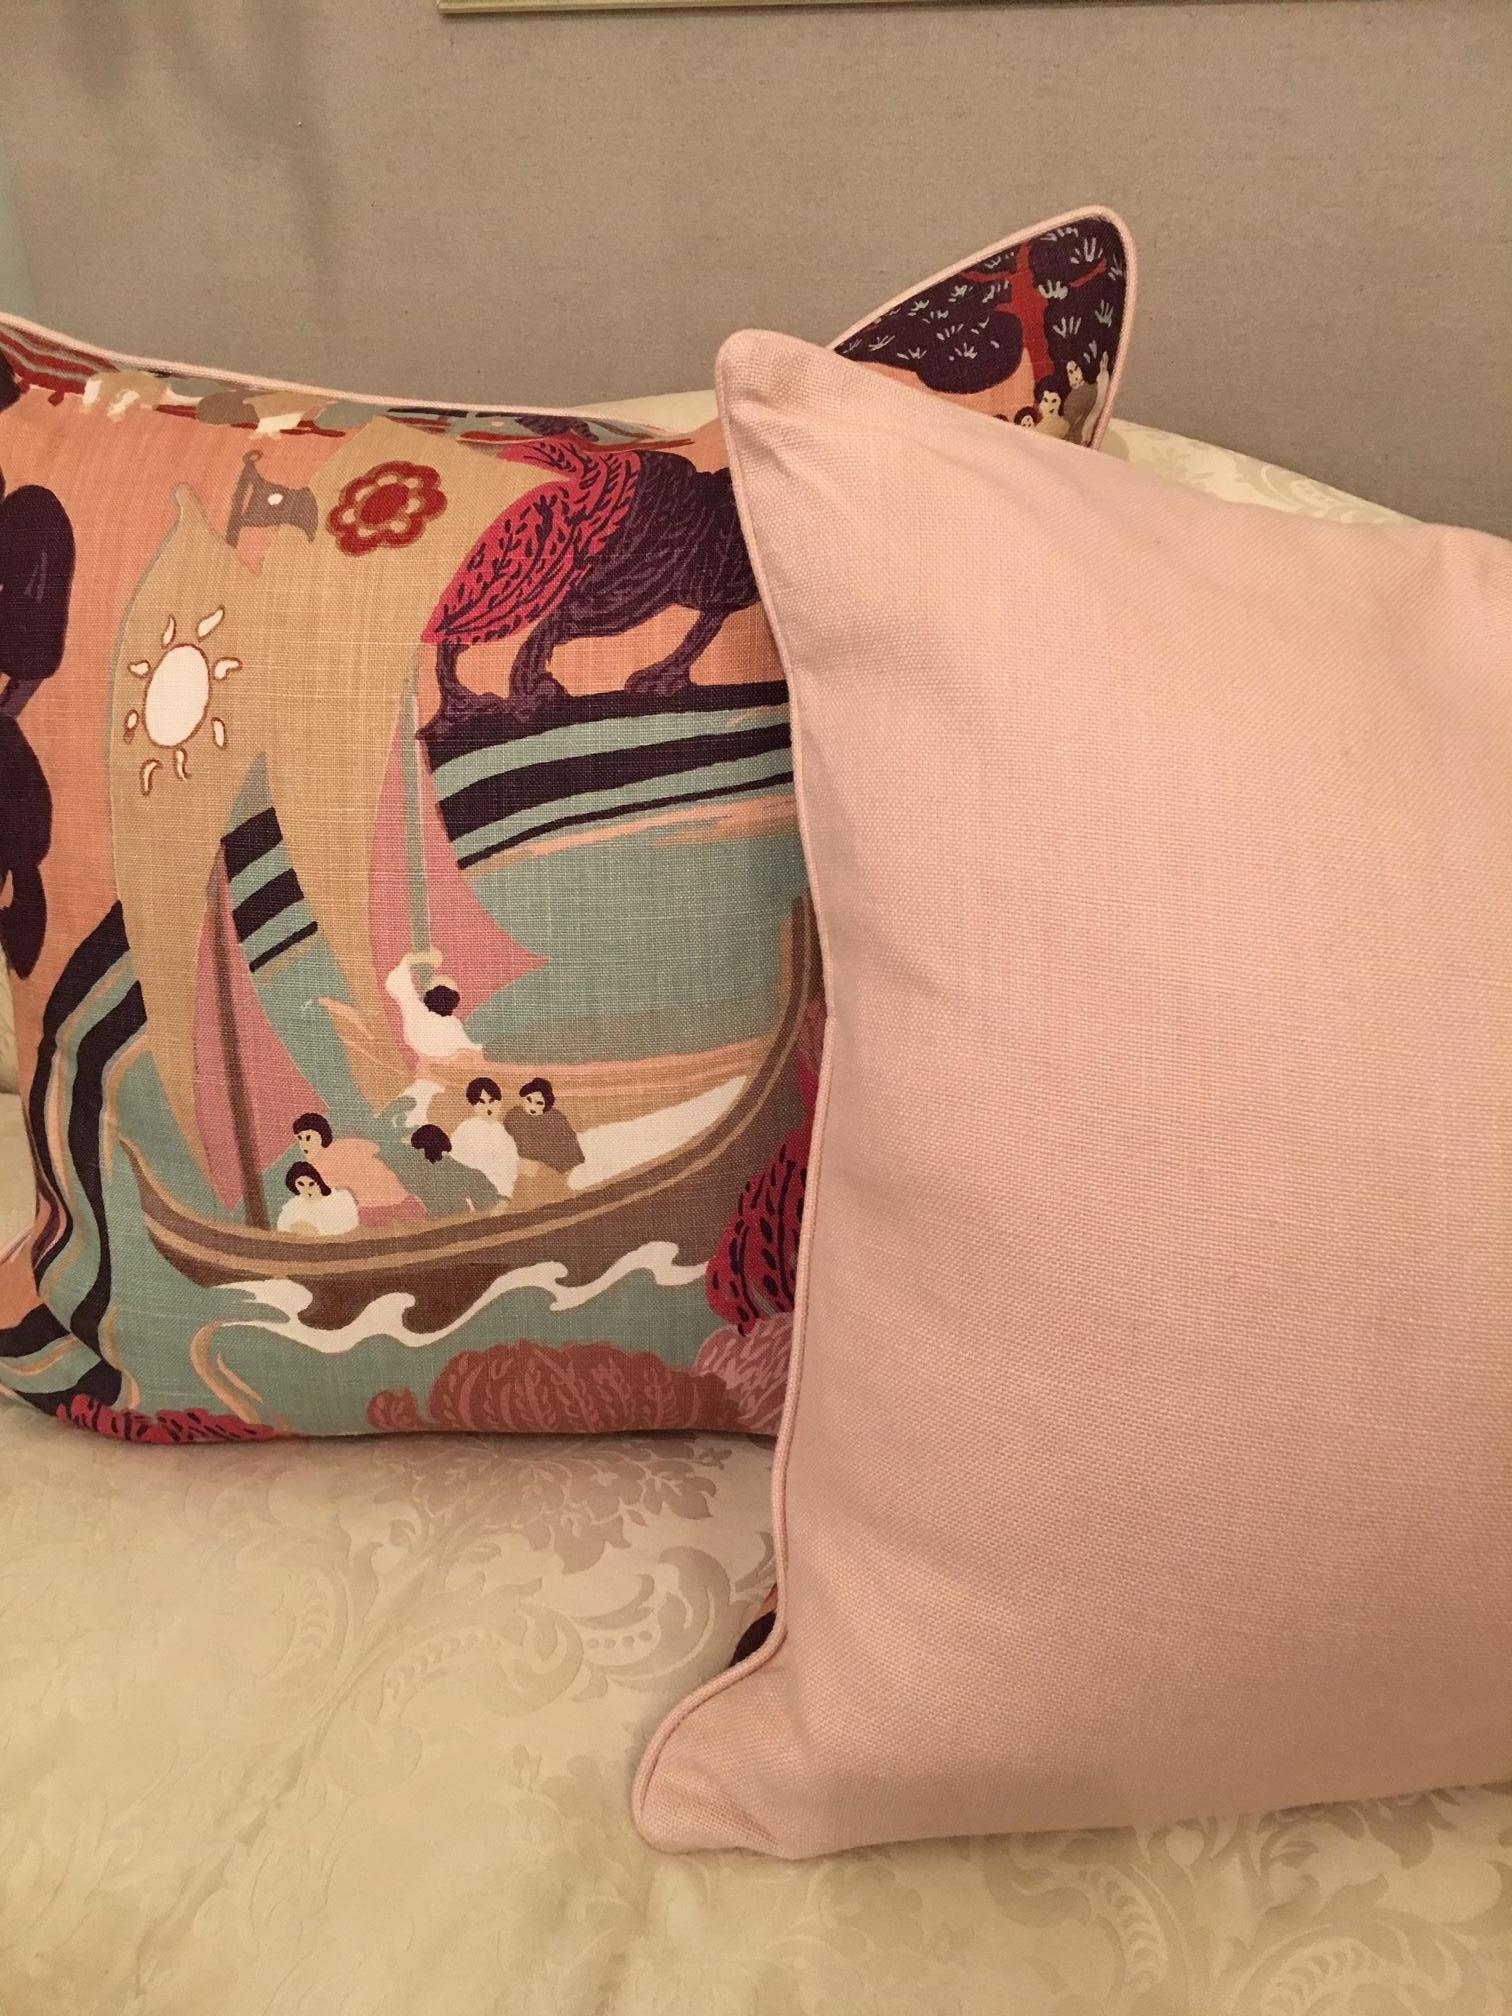 These lovely Schumacher pillows in the coveted Pearl River pattern is set in an appealing color way of rose, salmon, aqua and mocha. They are backed with heavy pale pink linen and filled with down and feather pillows. Plump and cozy, they are 23 x